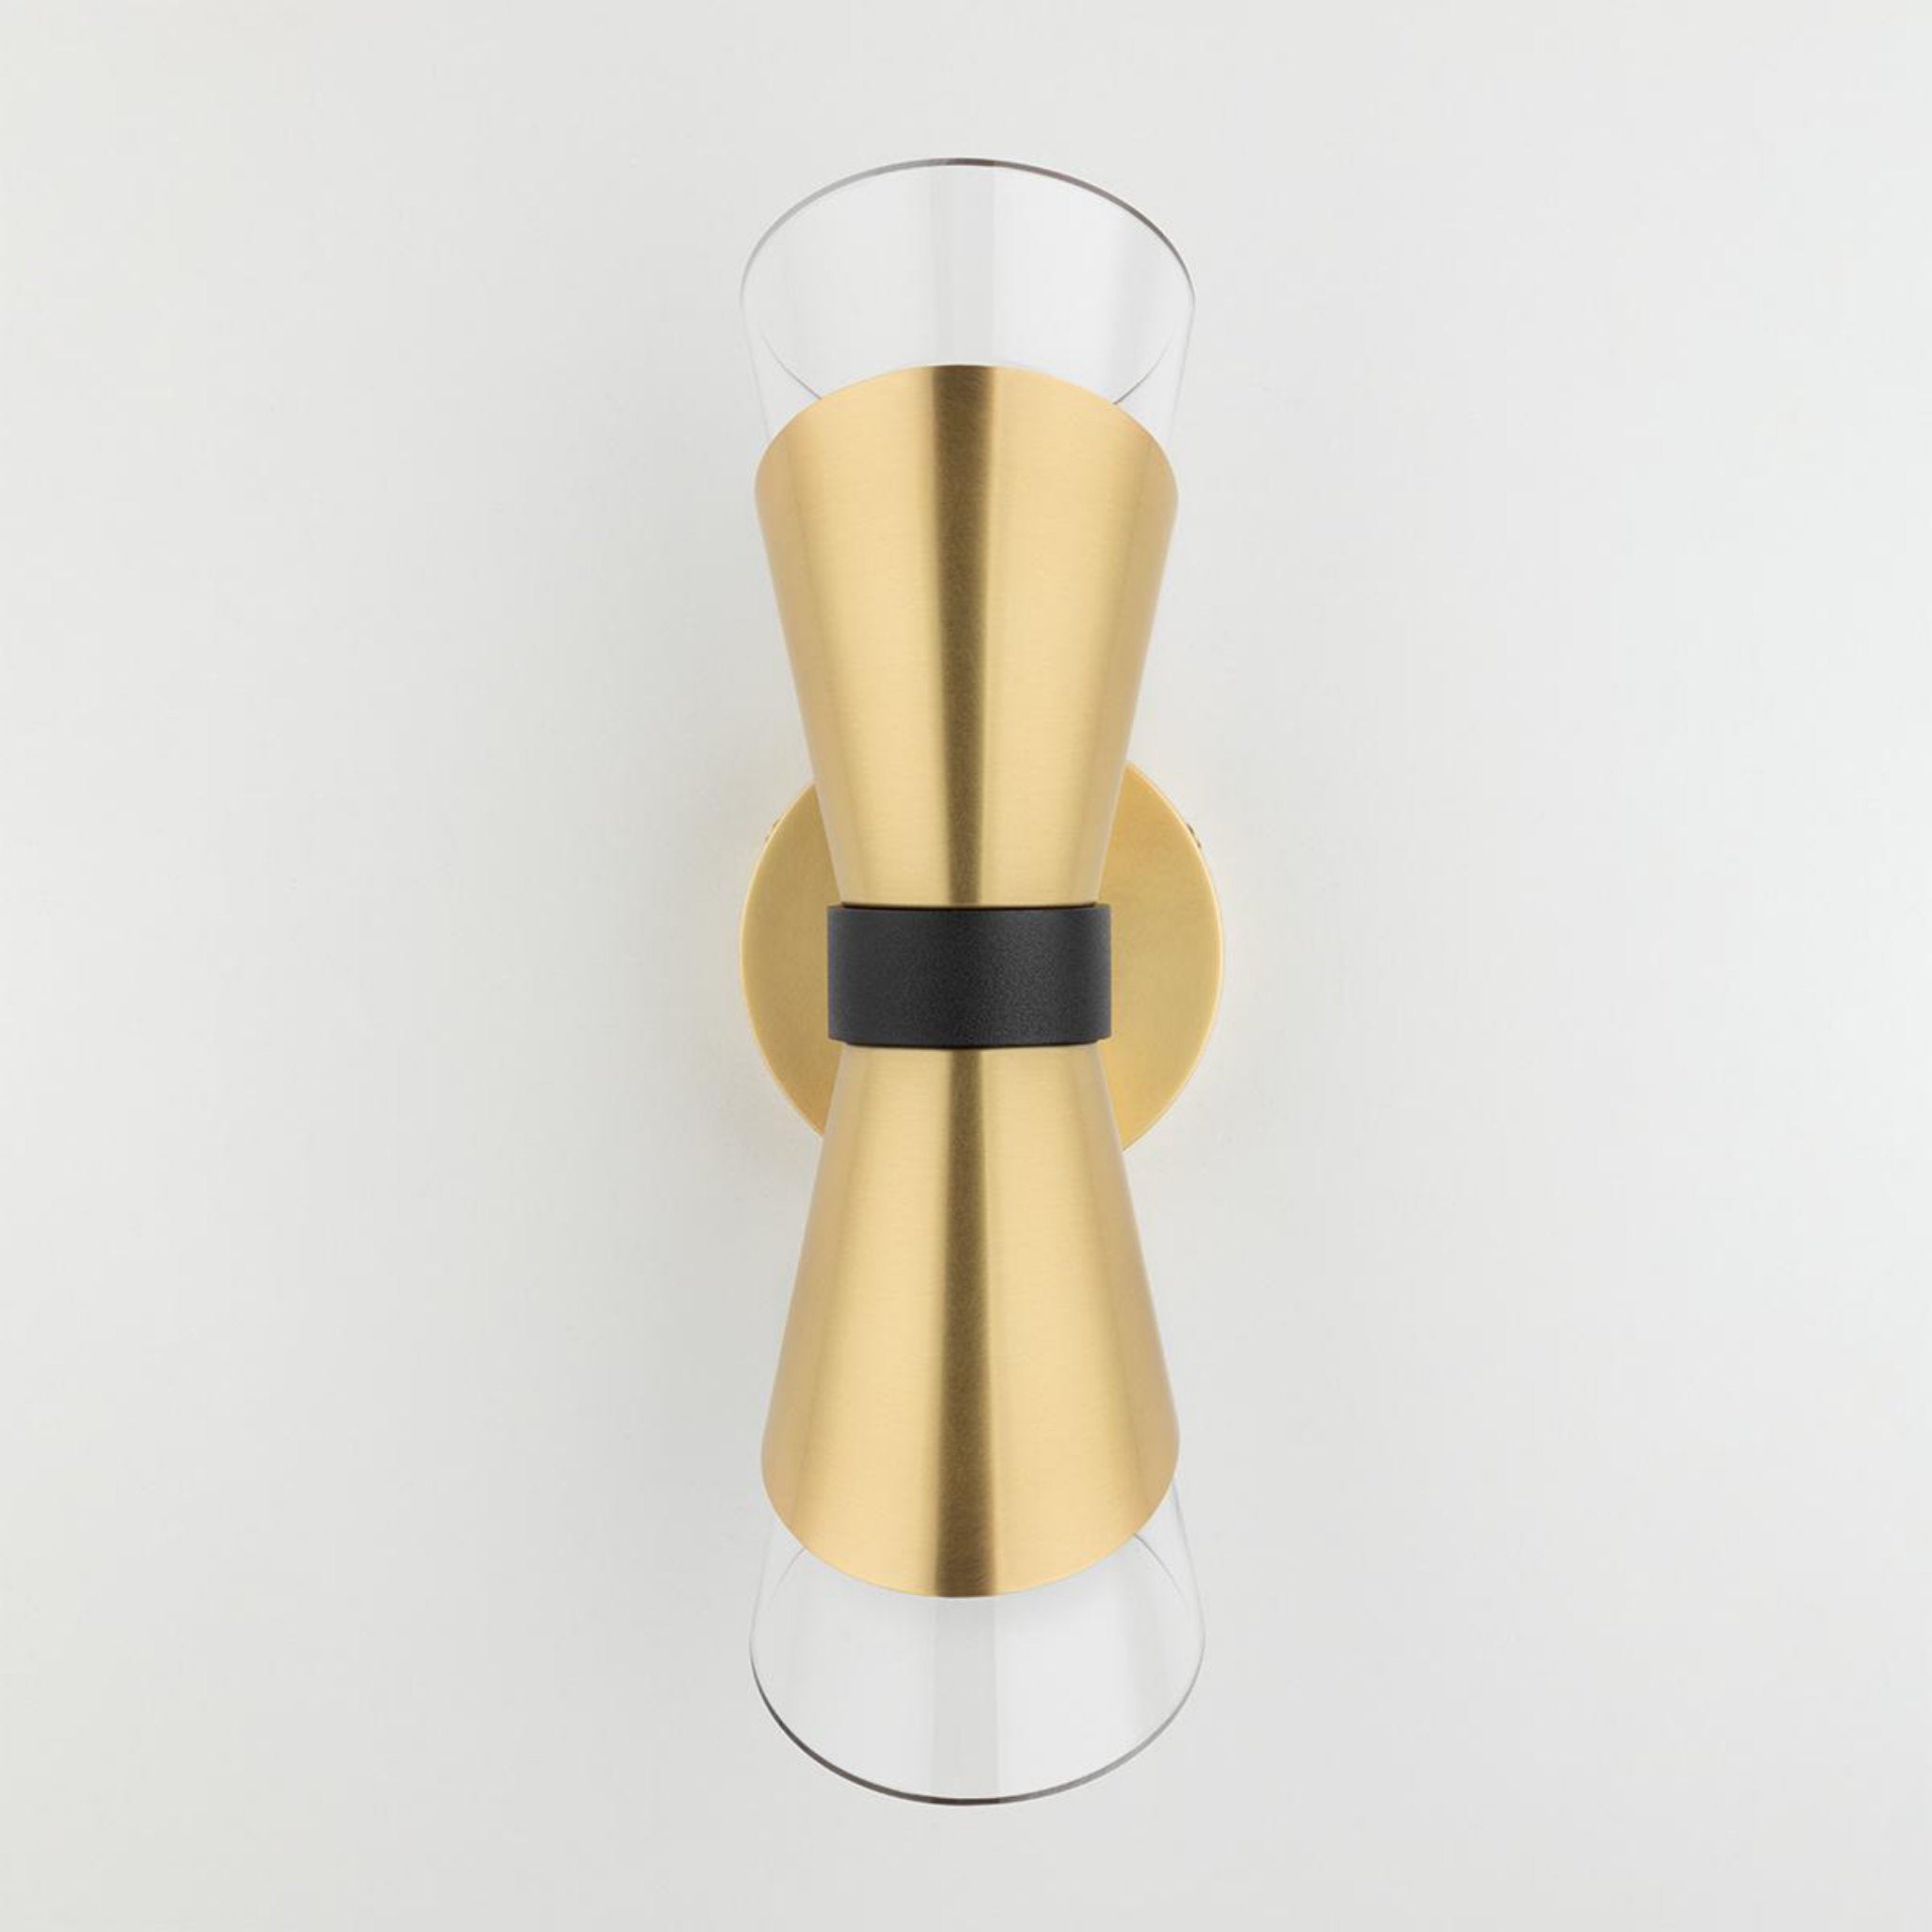 Angie 2-Light Wall Sconce in Aged Brass/Black